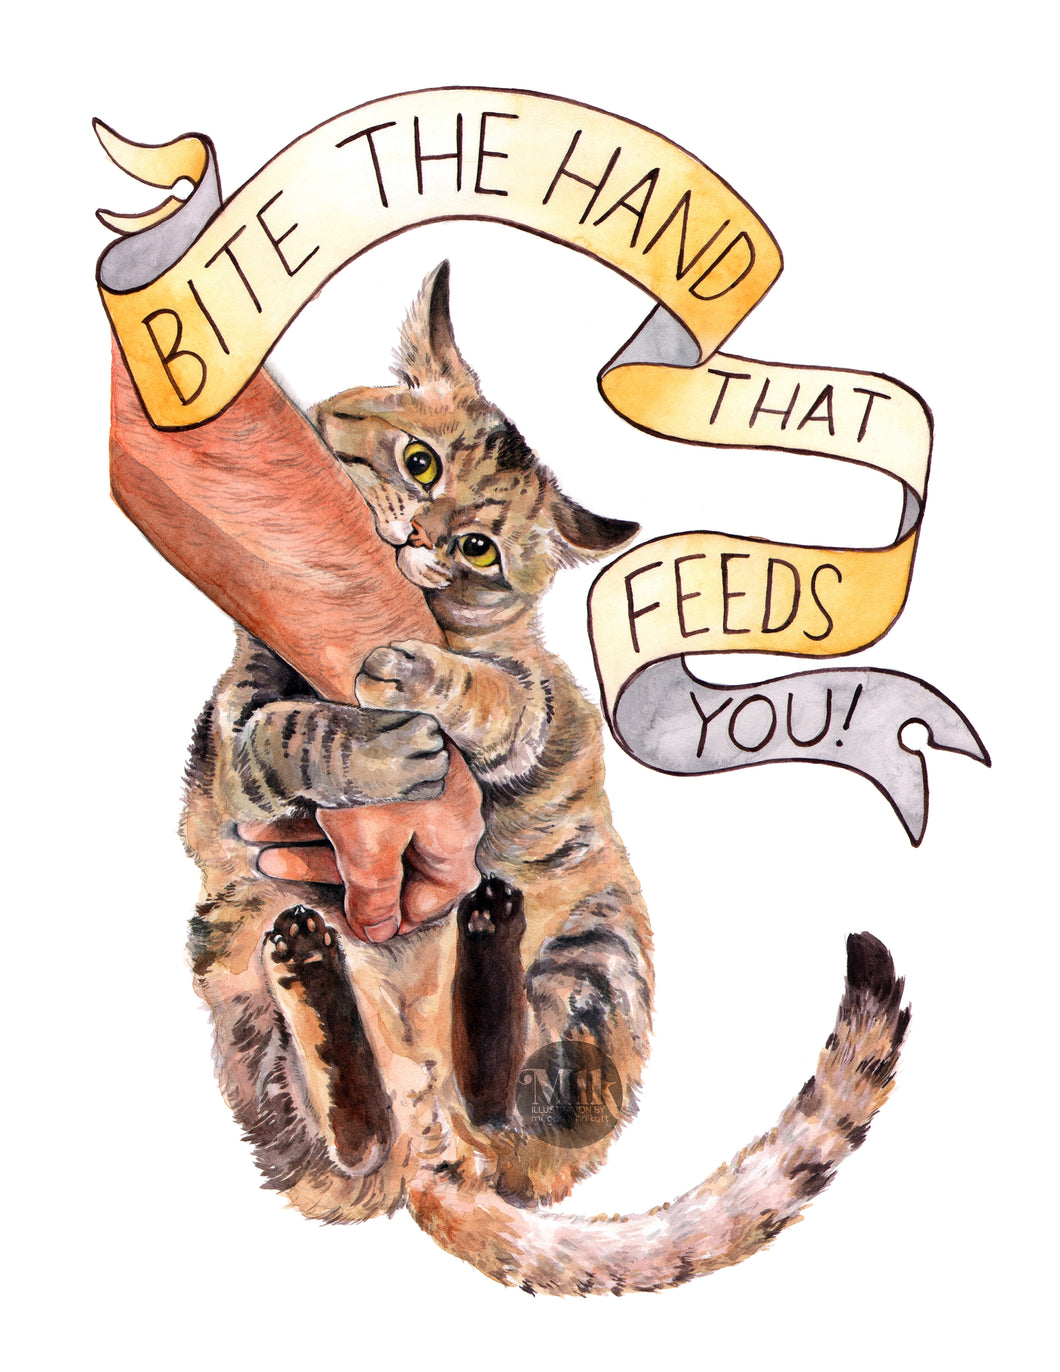 Bite The Hand That Feeds You - 11x14